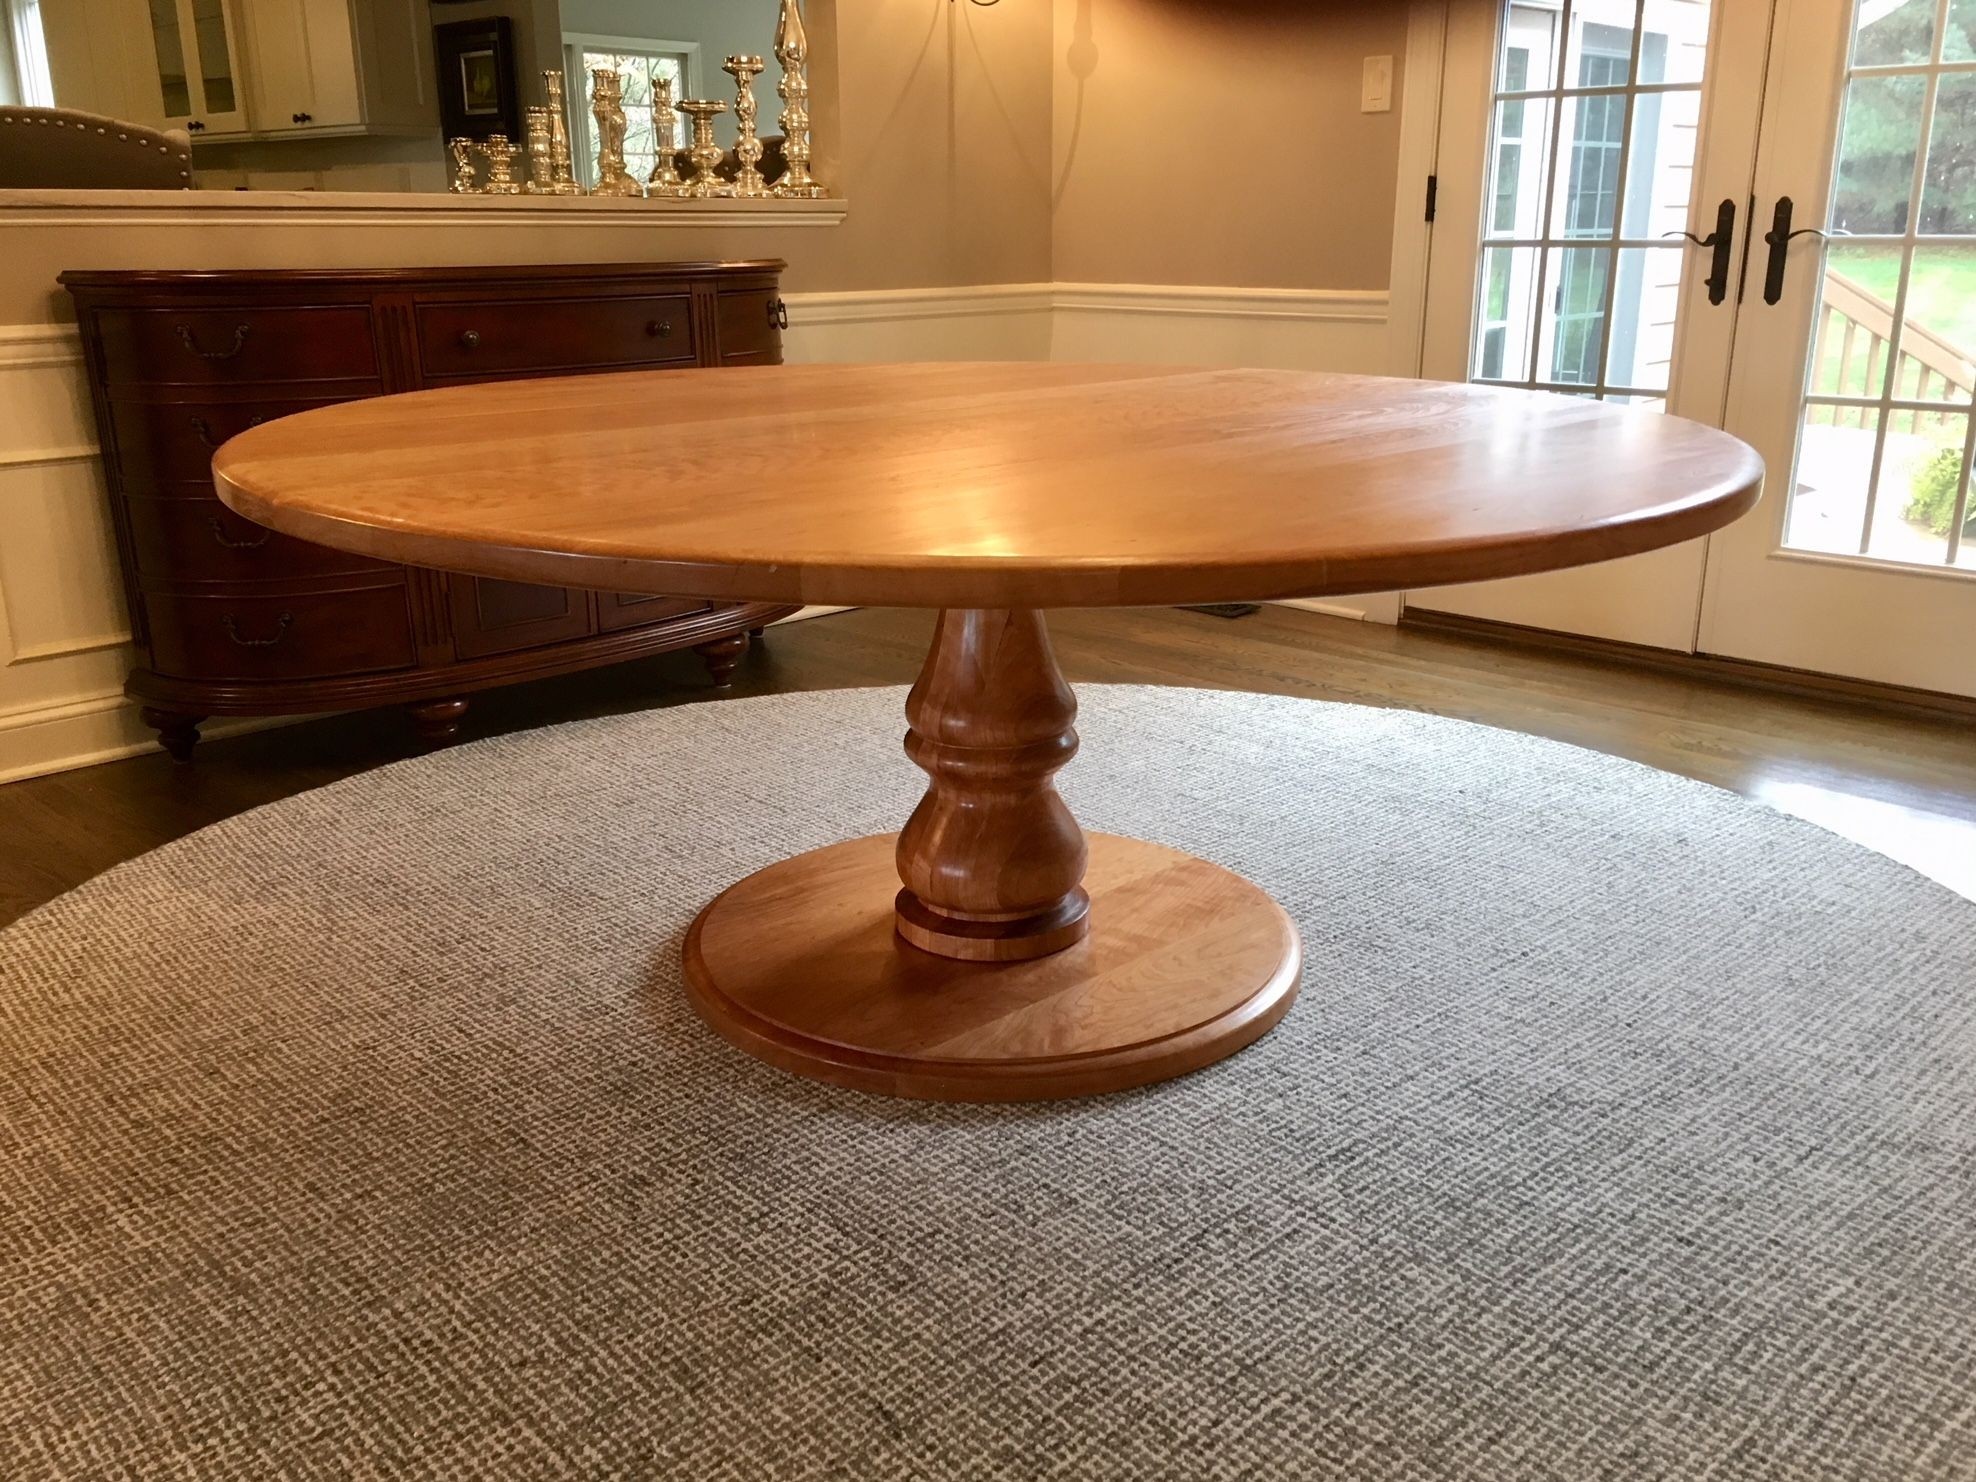 Hand crafted large round pedestal dining table with turned